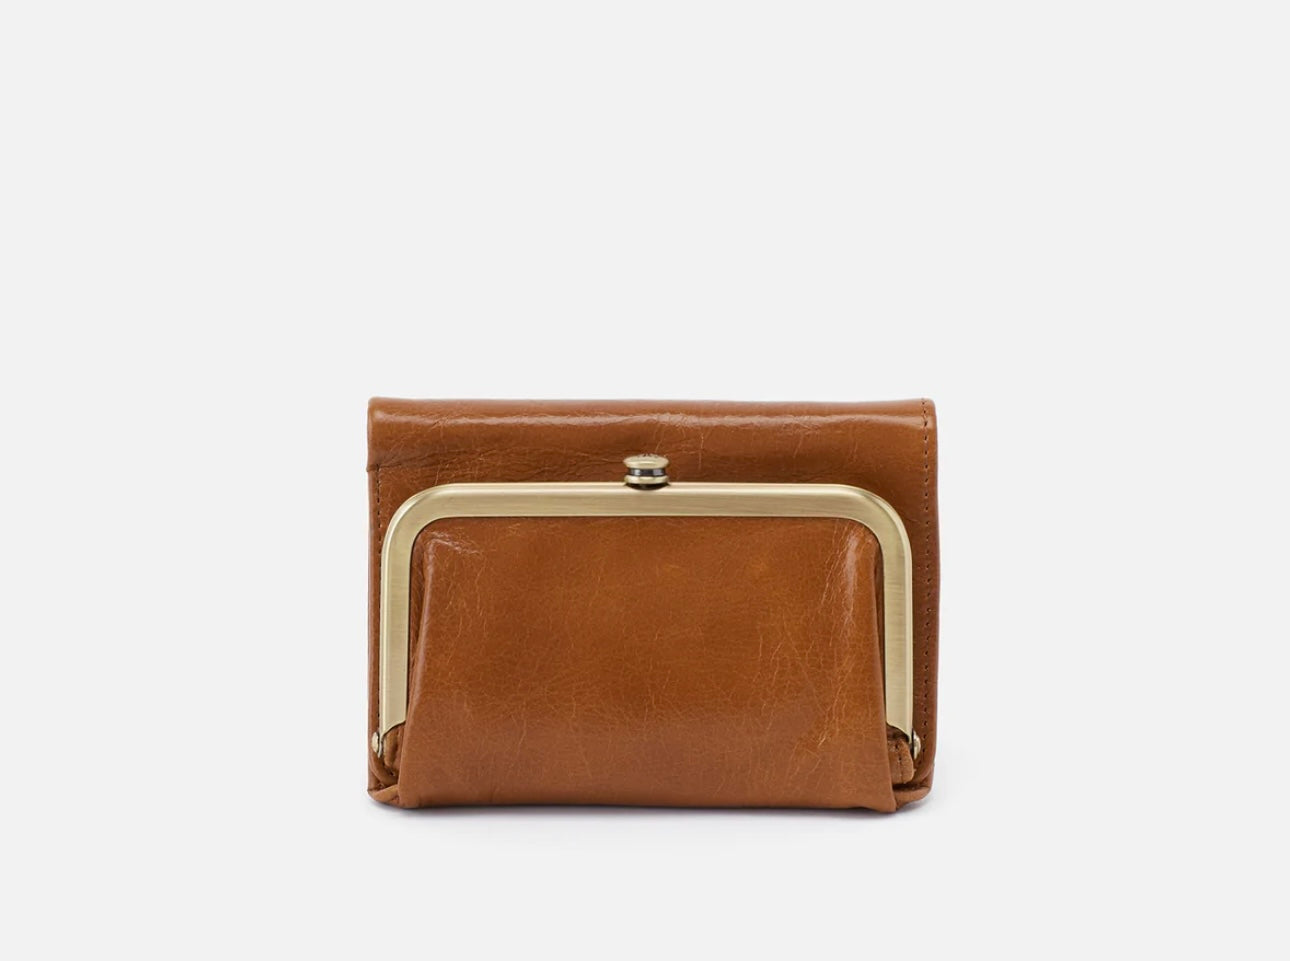 The Robin Wallet